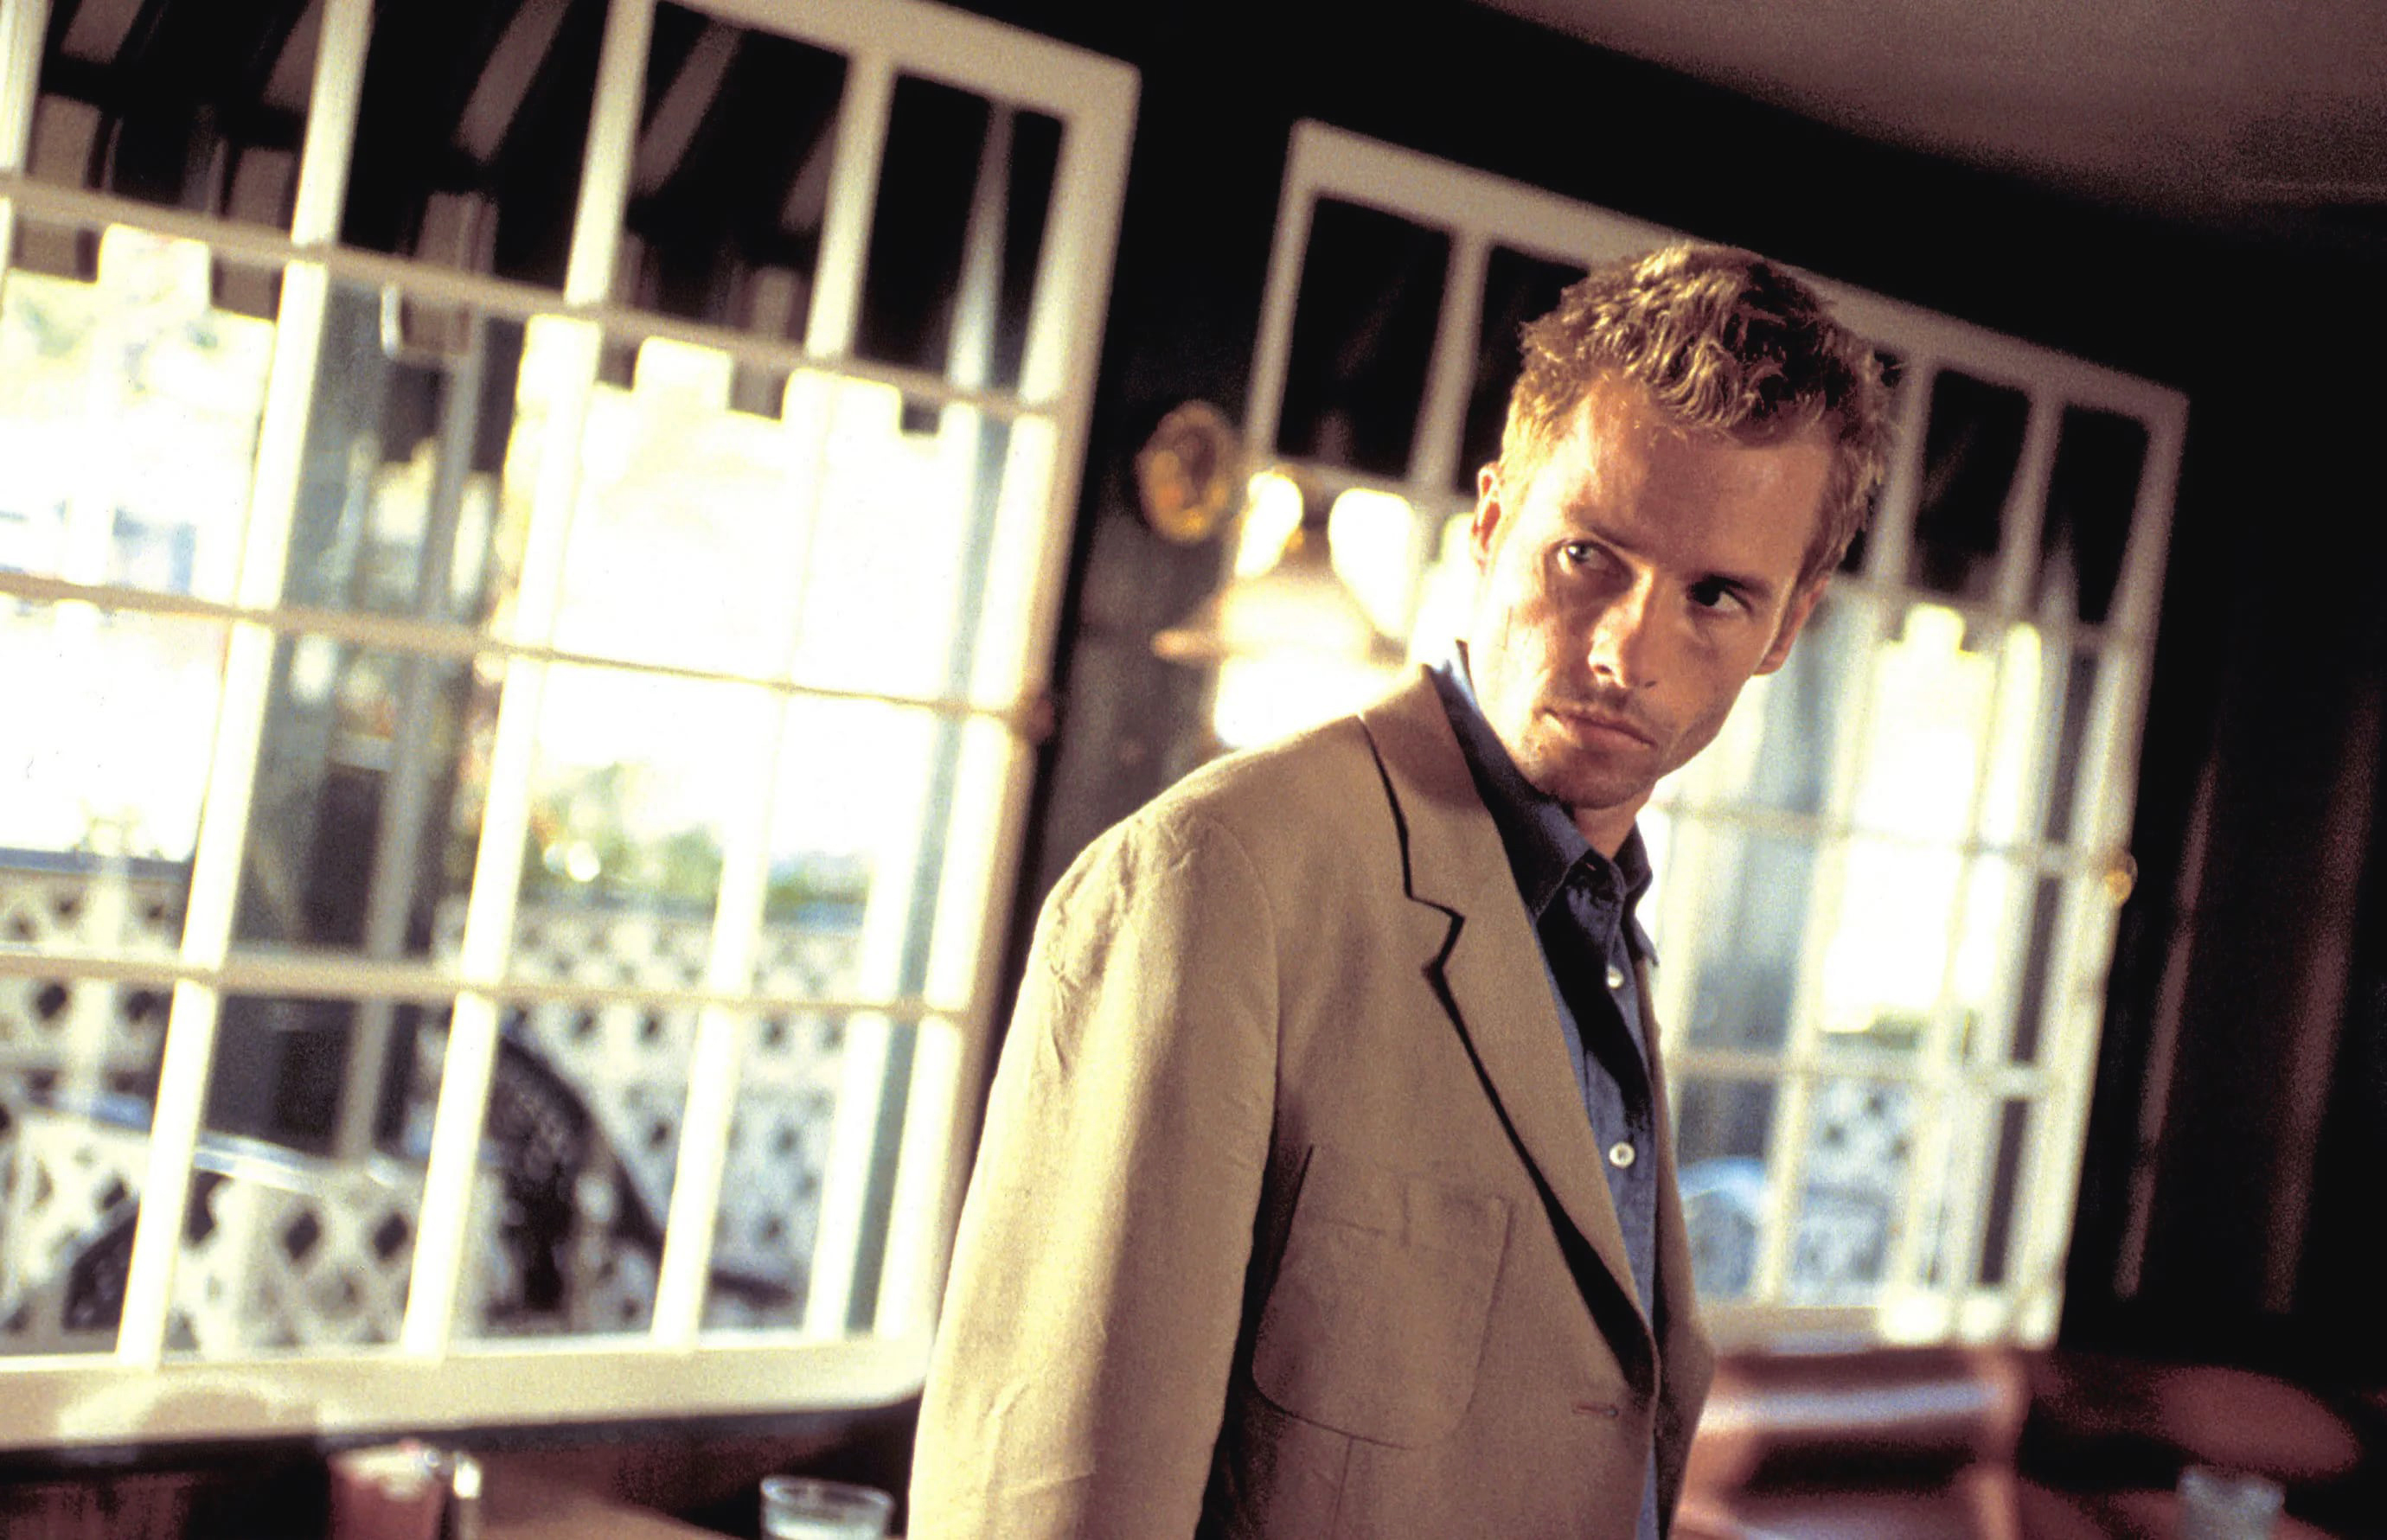 Memento1 -How ‘Memento’ Is Still The Greatest Film About Self-Delusion By Christopher Nolan